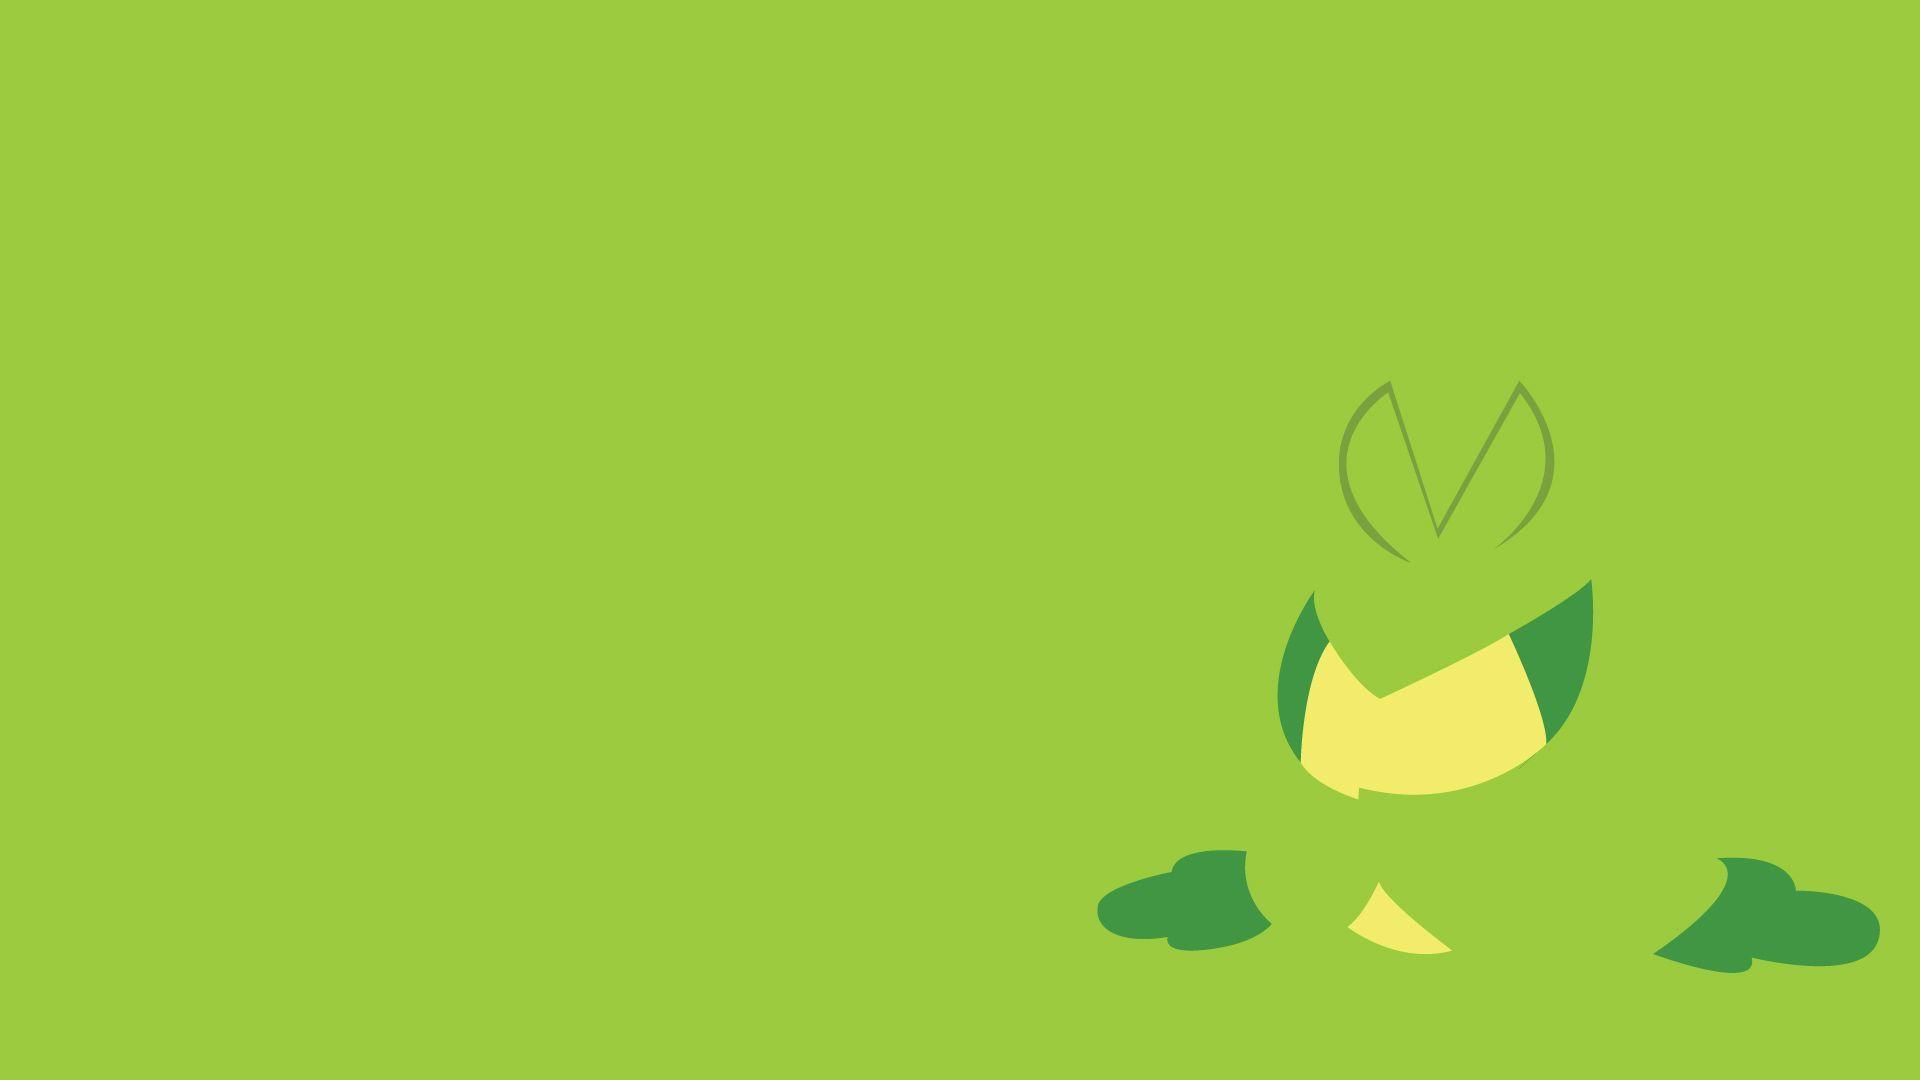 Swadloon Wallpapers px